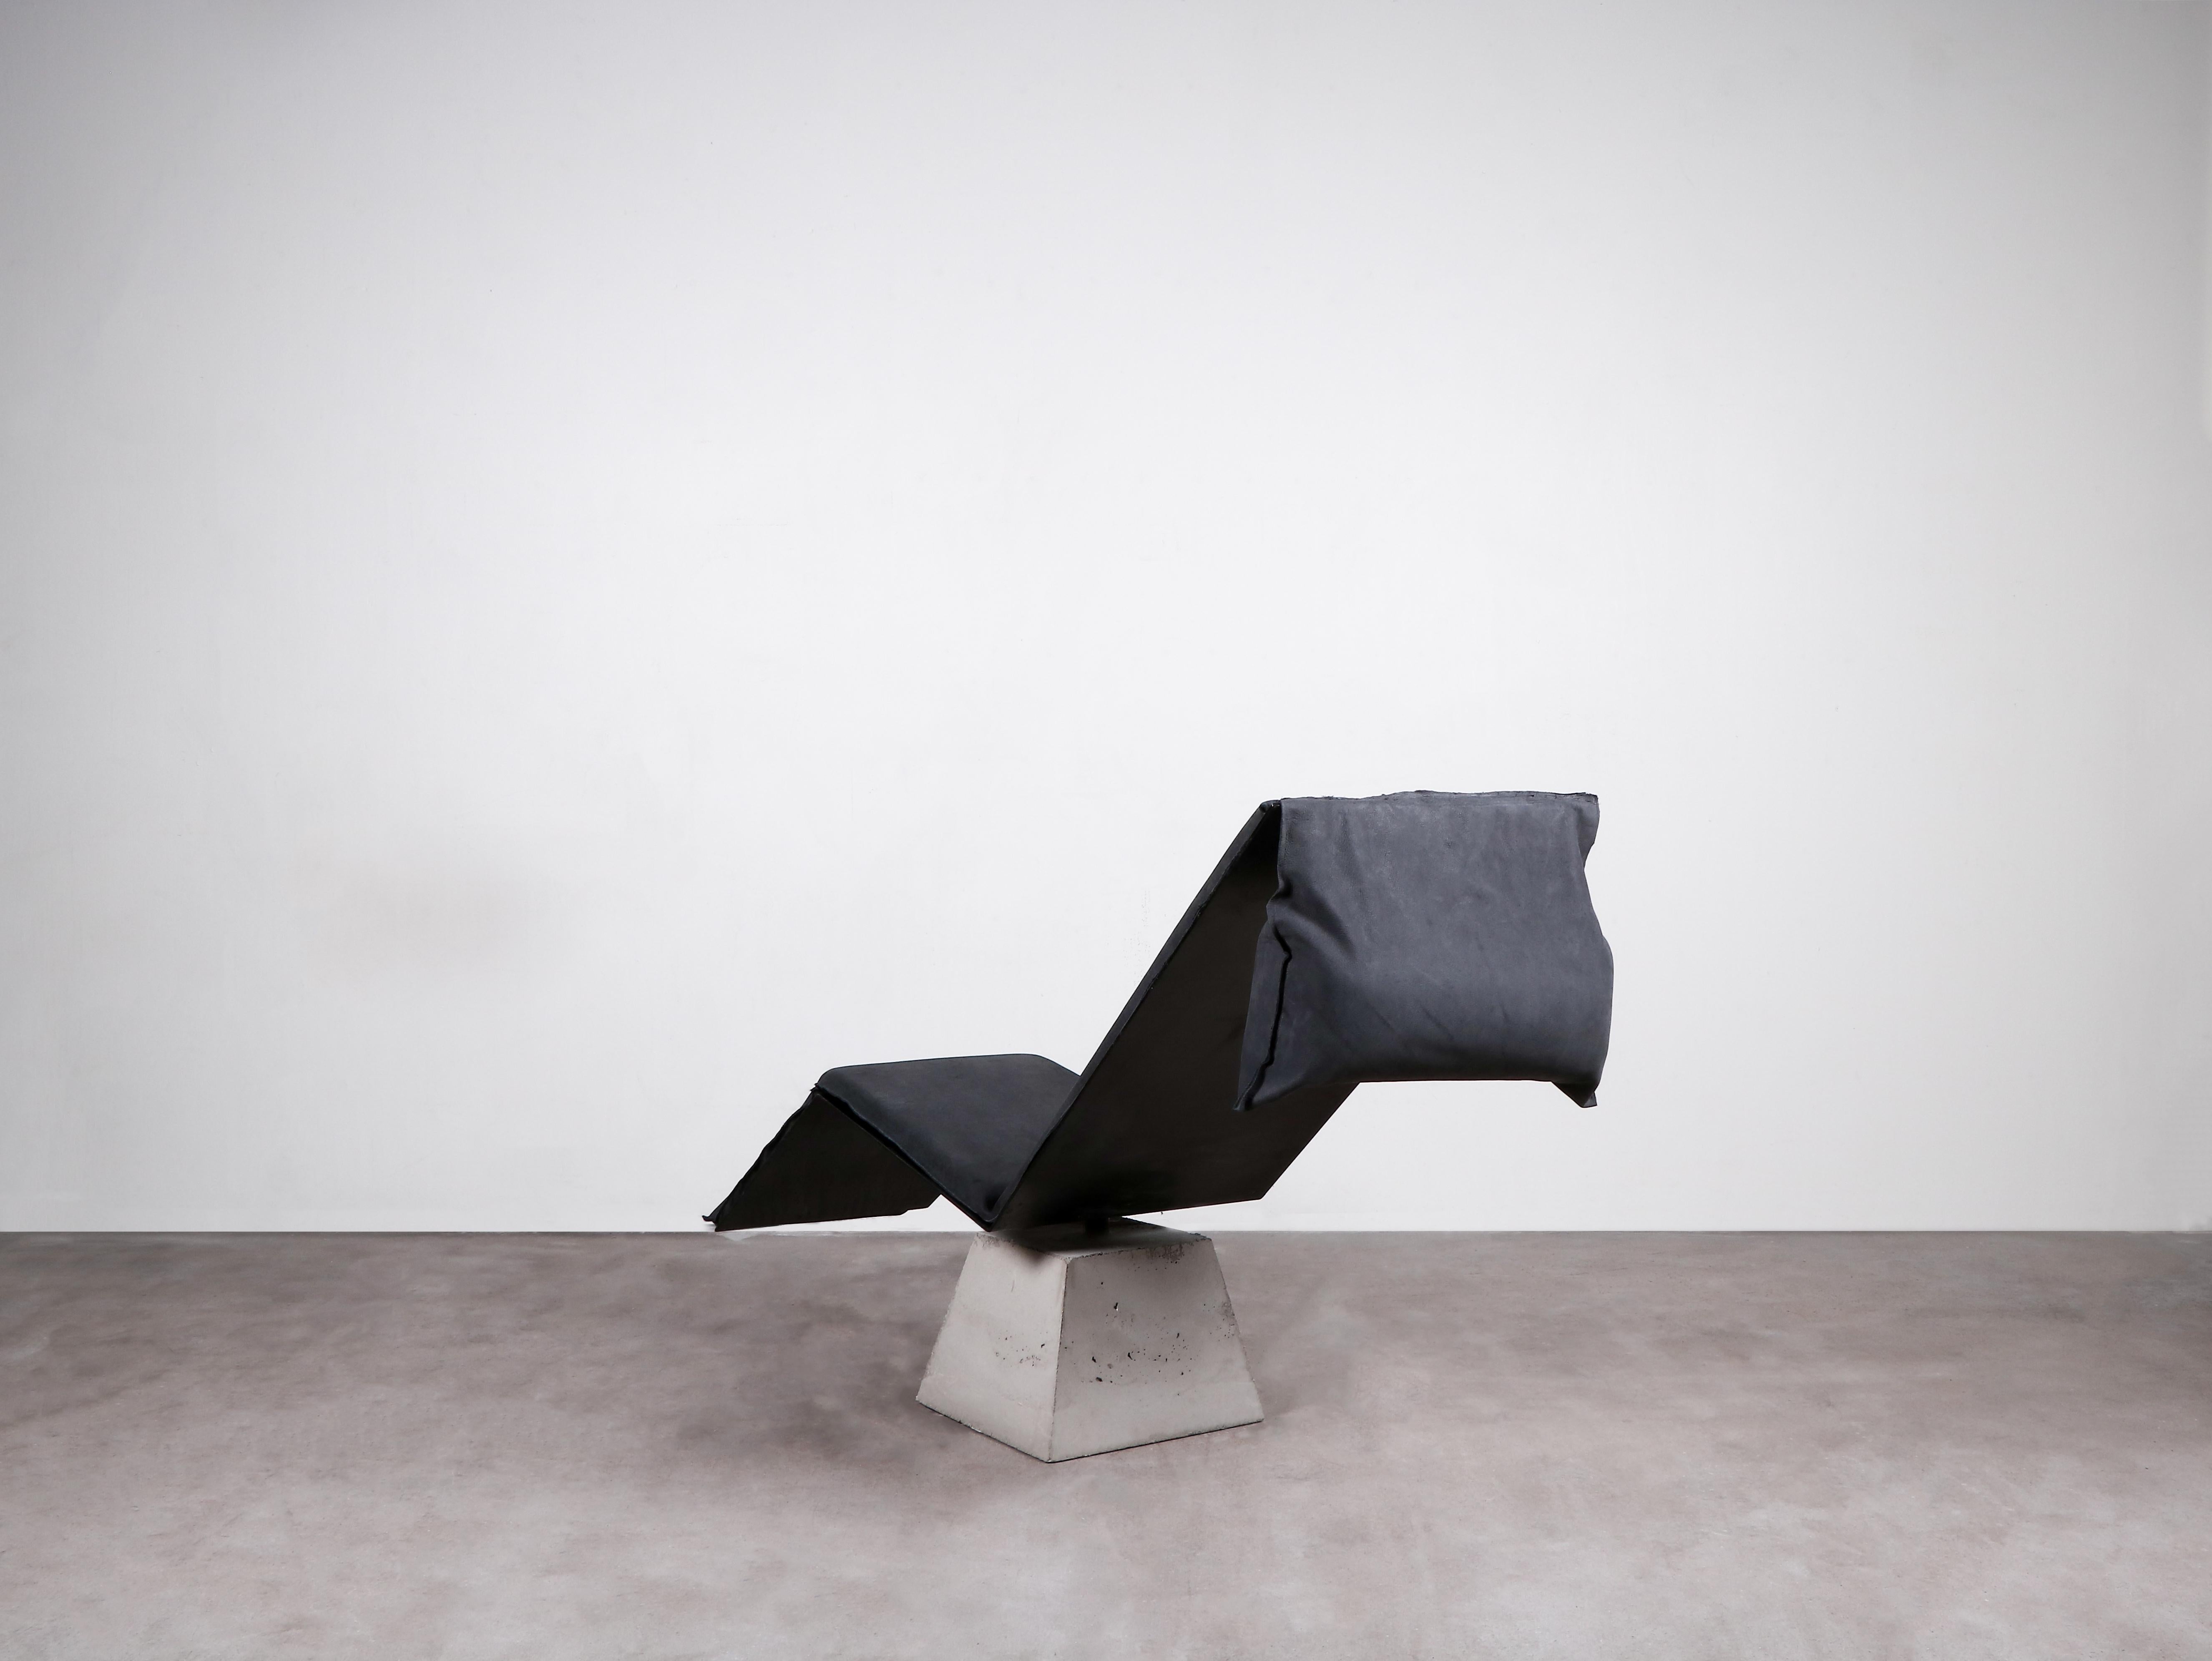 Contemporary black lounge chair / chaise lounge - Flykt chair by Lucas Morten

2020
Limited edition of 18 + 1 AP
Dimensions (cm): L 150 H 83 W 50
Material: concrete, burned waxed steel and hand-waxed upholstered cushion color/black and